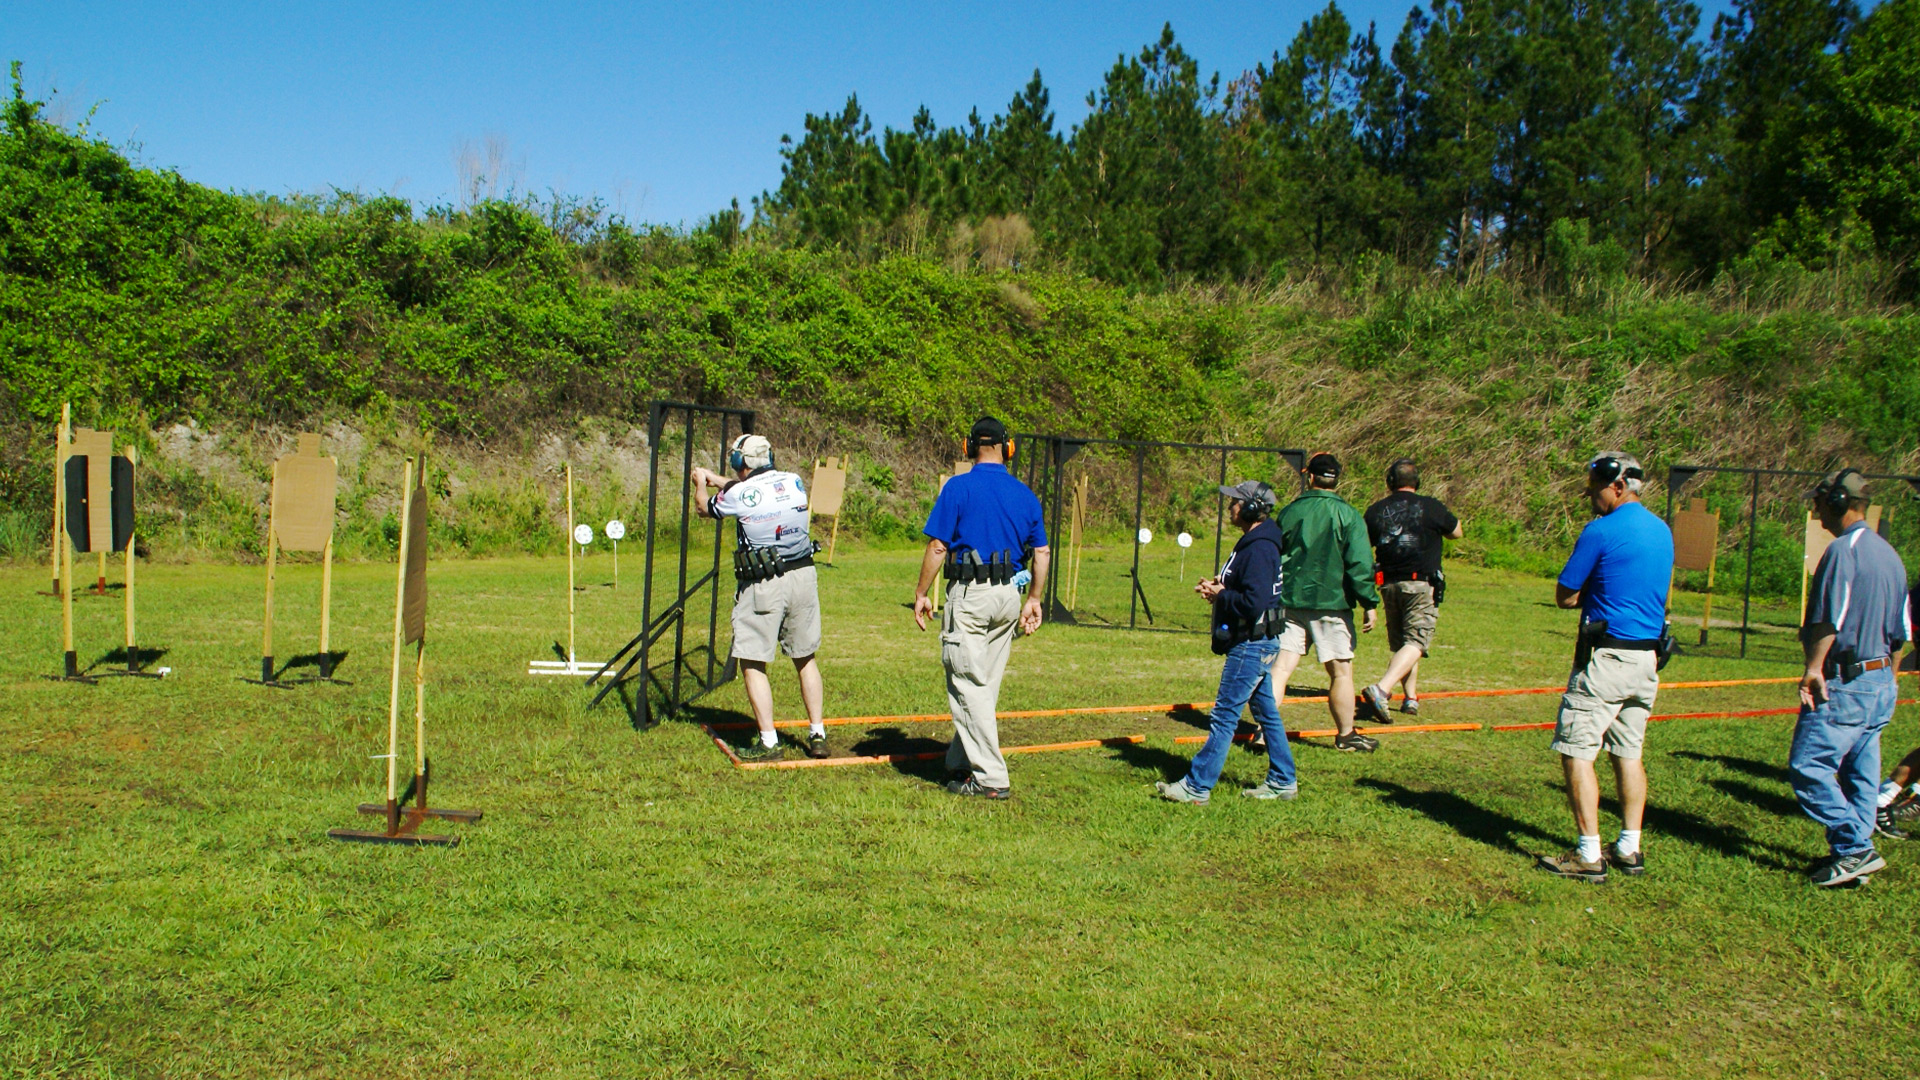 Shooters in between stages at a USPSA match